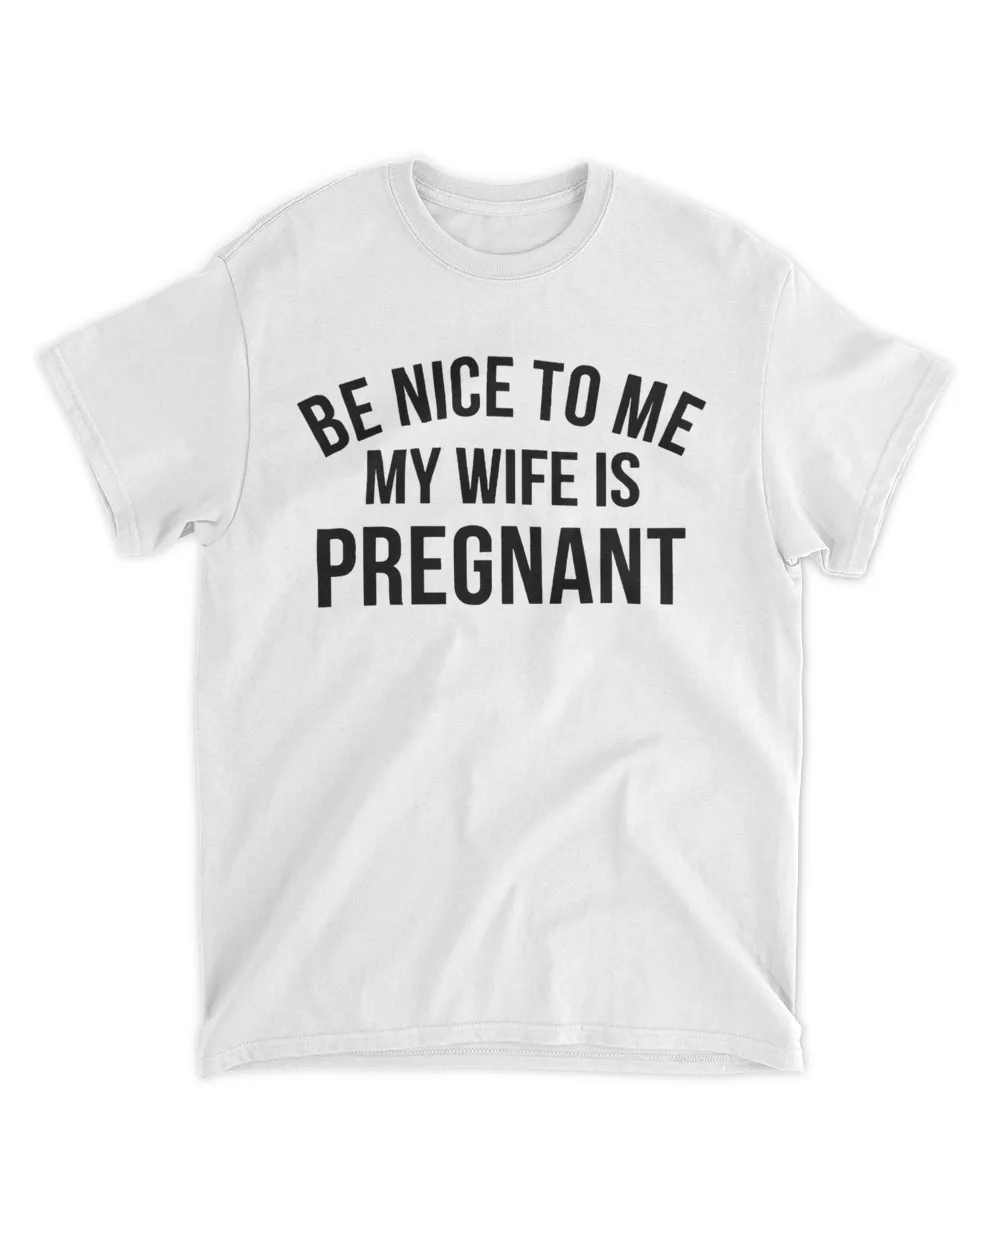 "Be Nice to Me. My Wife is Pregnant." - Funny Pregnancy Announcement Shirt